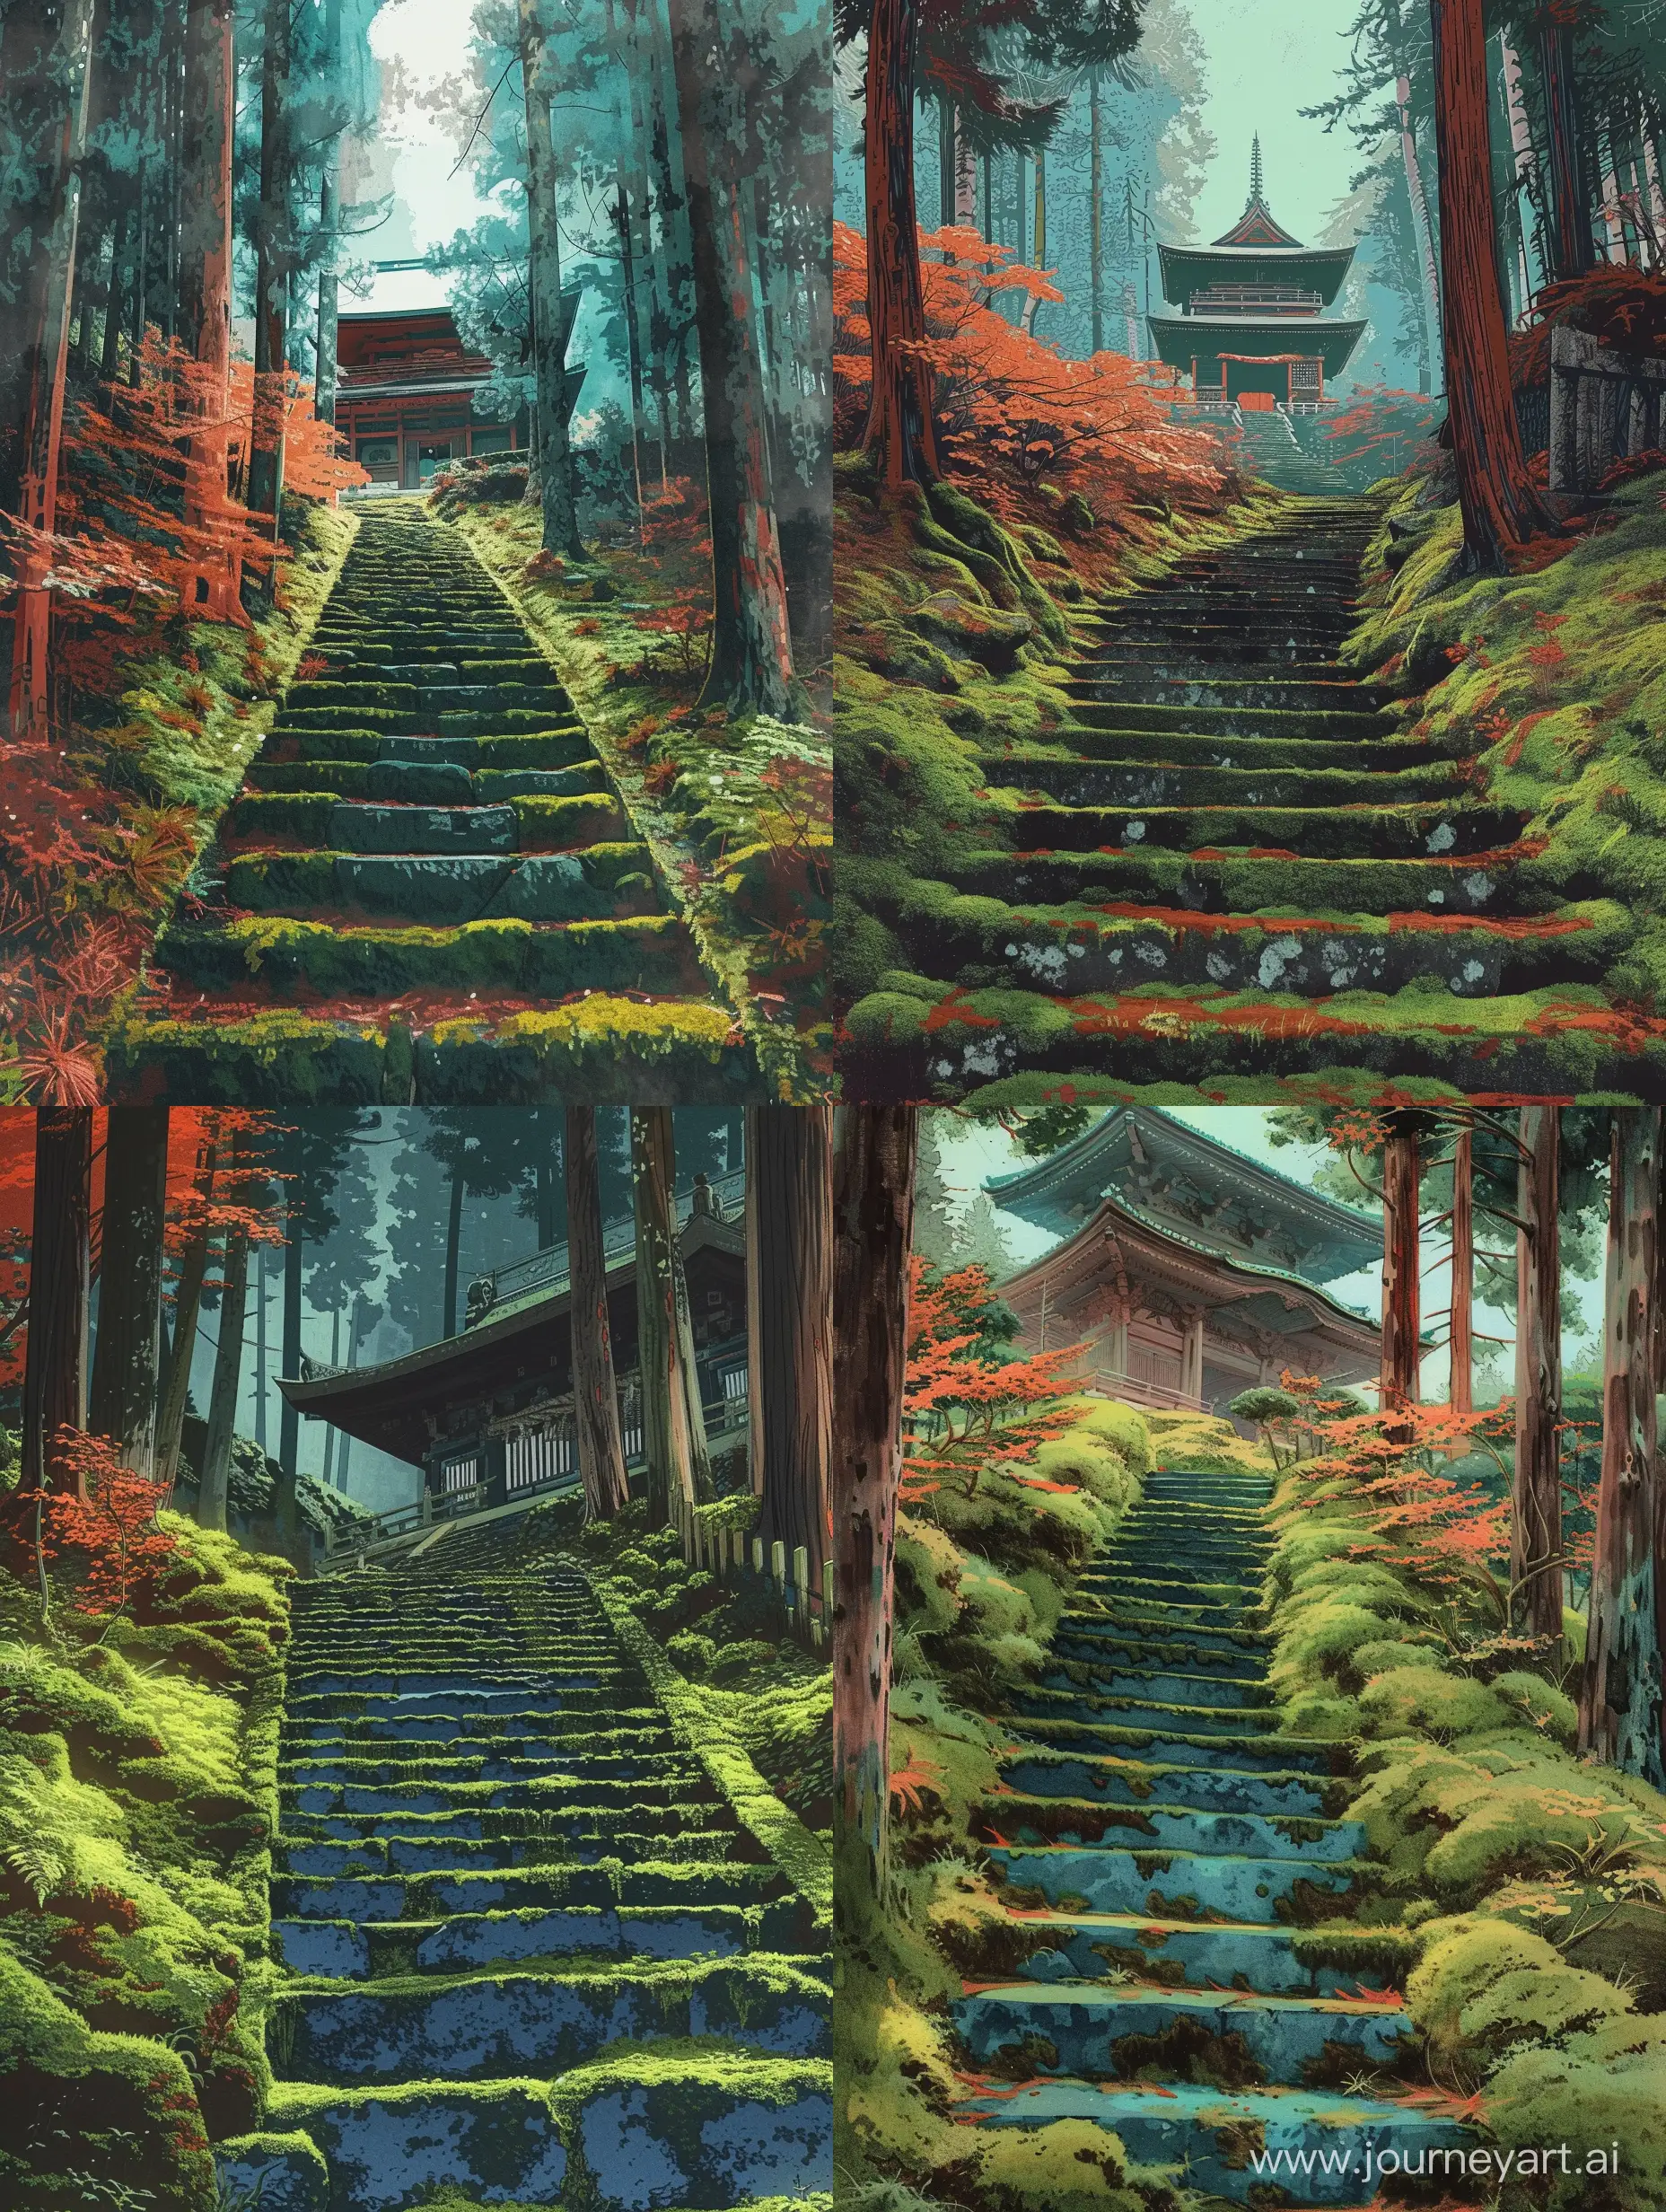 a mossy staircase in the spruce forest to the Japanese temple, going up, the view in front of the stairs. Colors: bluish green, green, red, orange, brown. In the style of an old illustration.